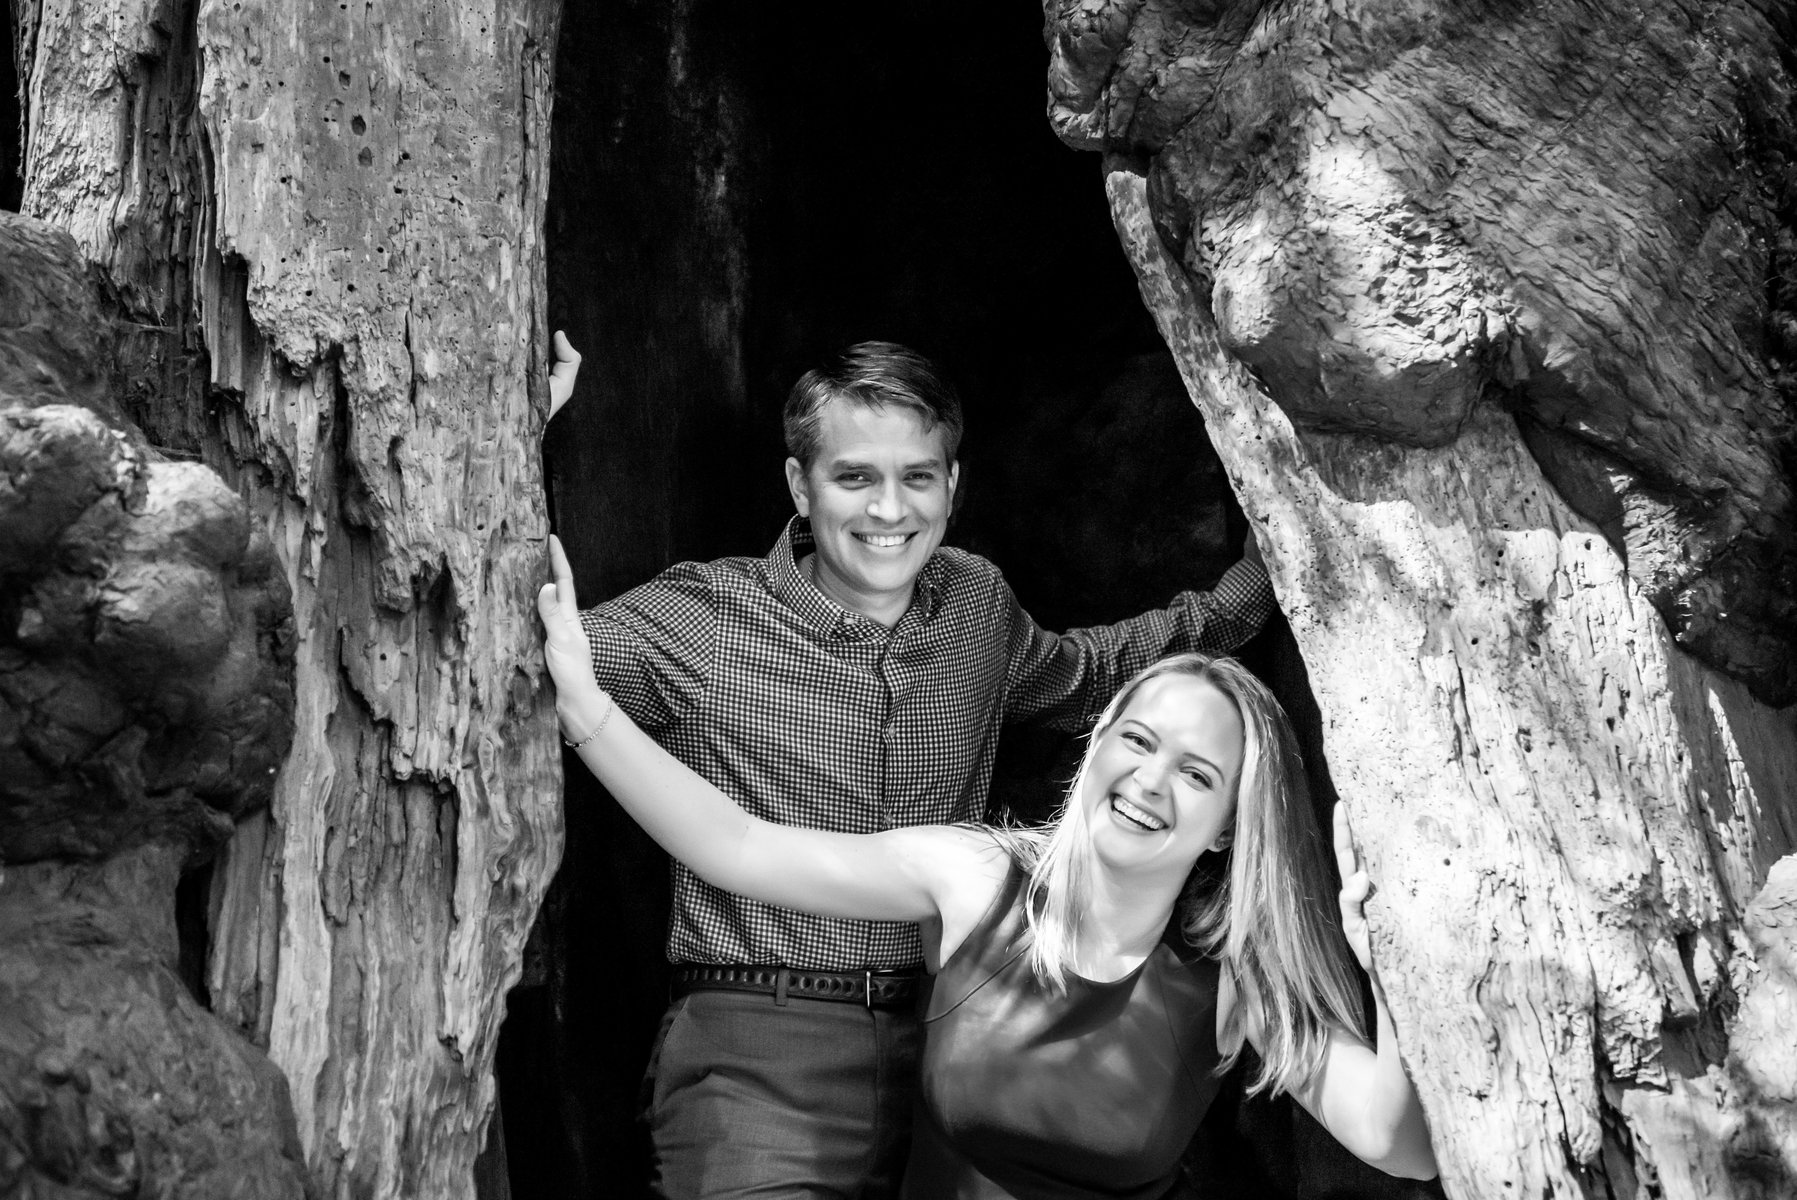 Lisa and Kenny Engagement Photos | True Photography